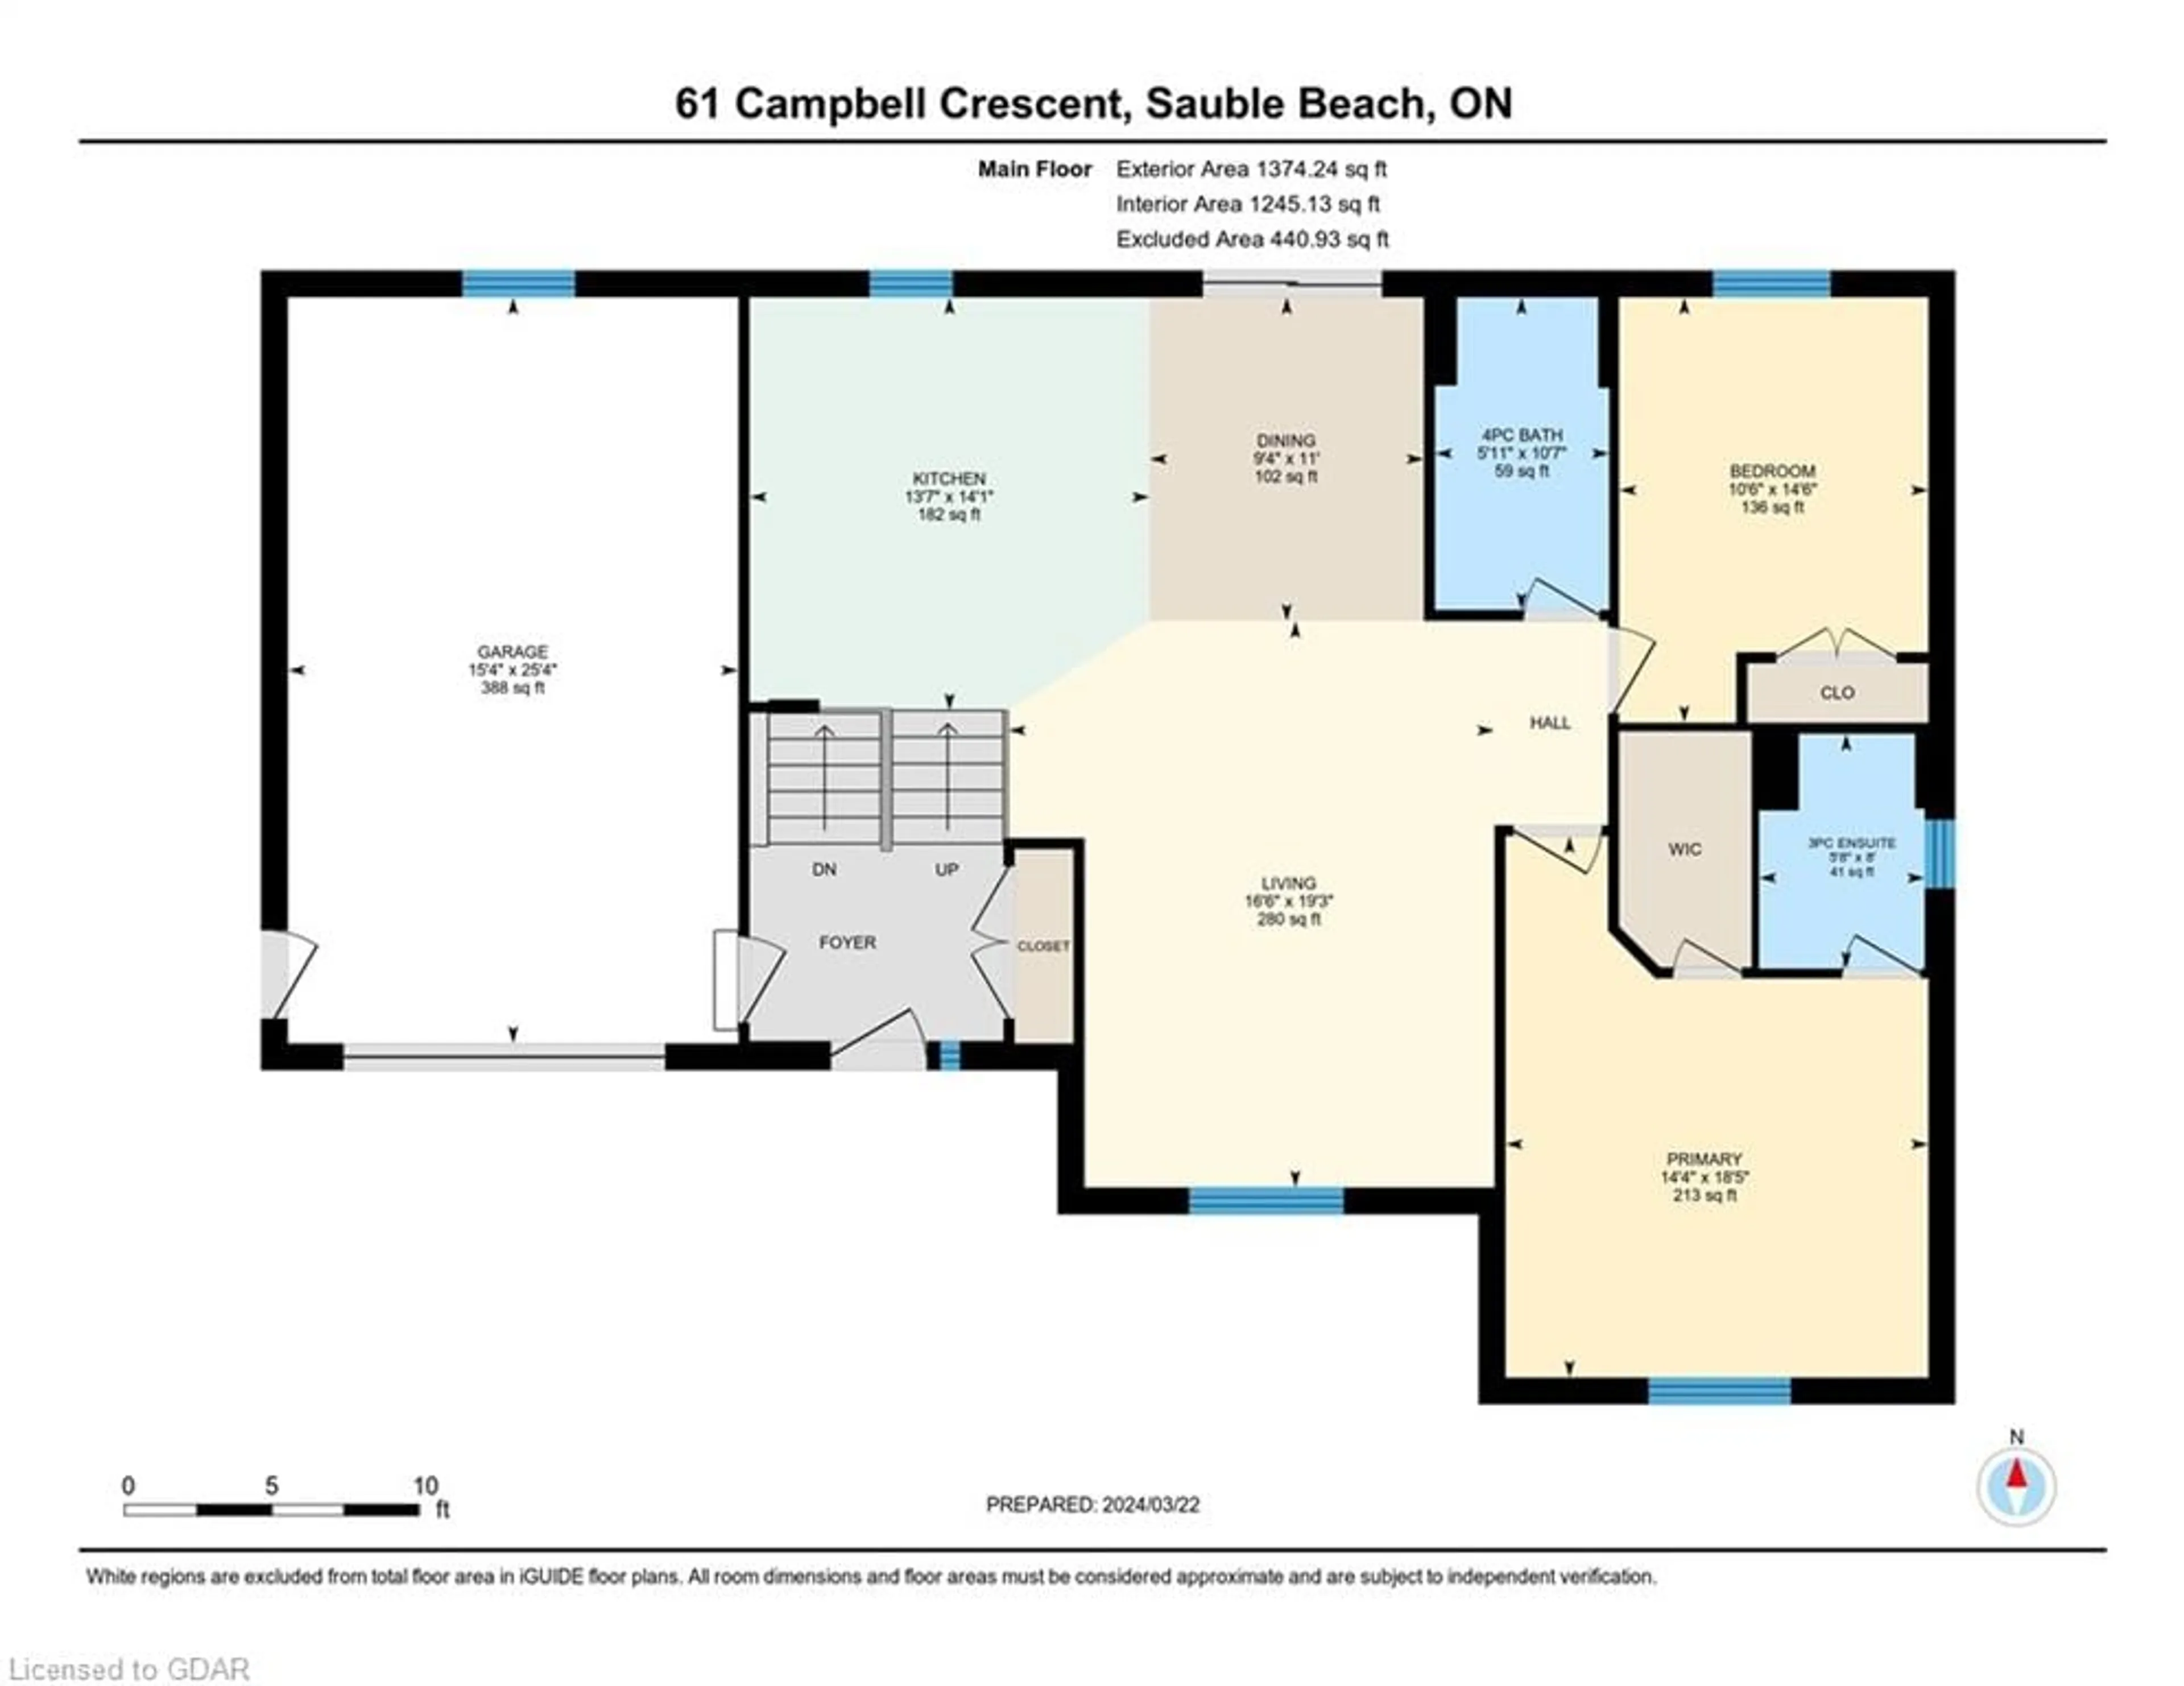 Floor plan for 61 Campbell Cres, Sauble Beach Ontario N0H 2G0